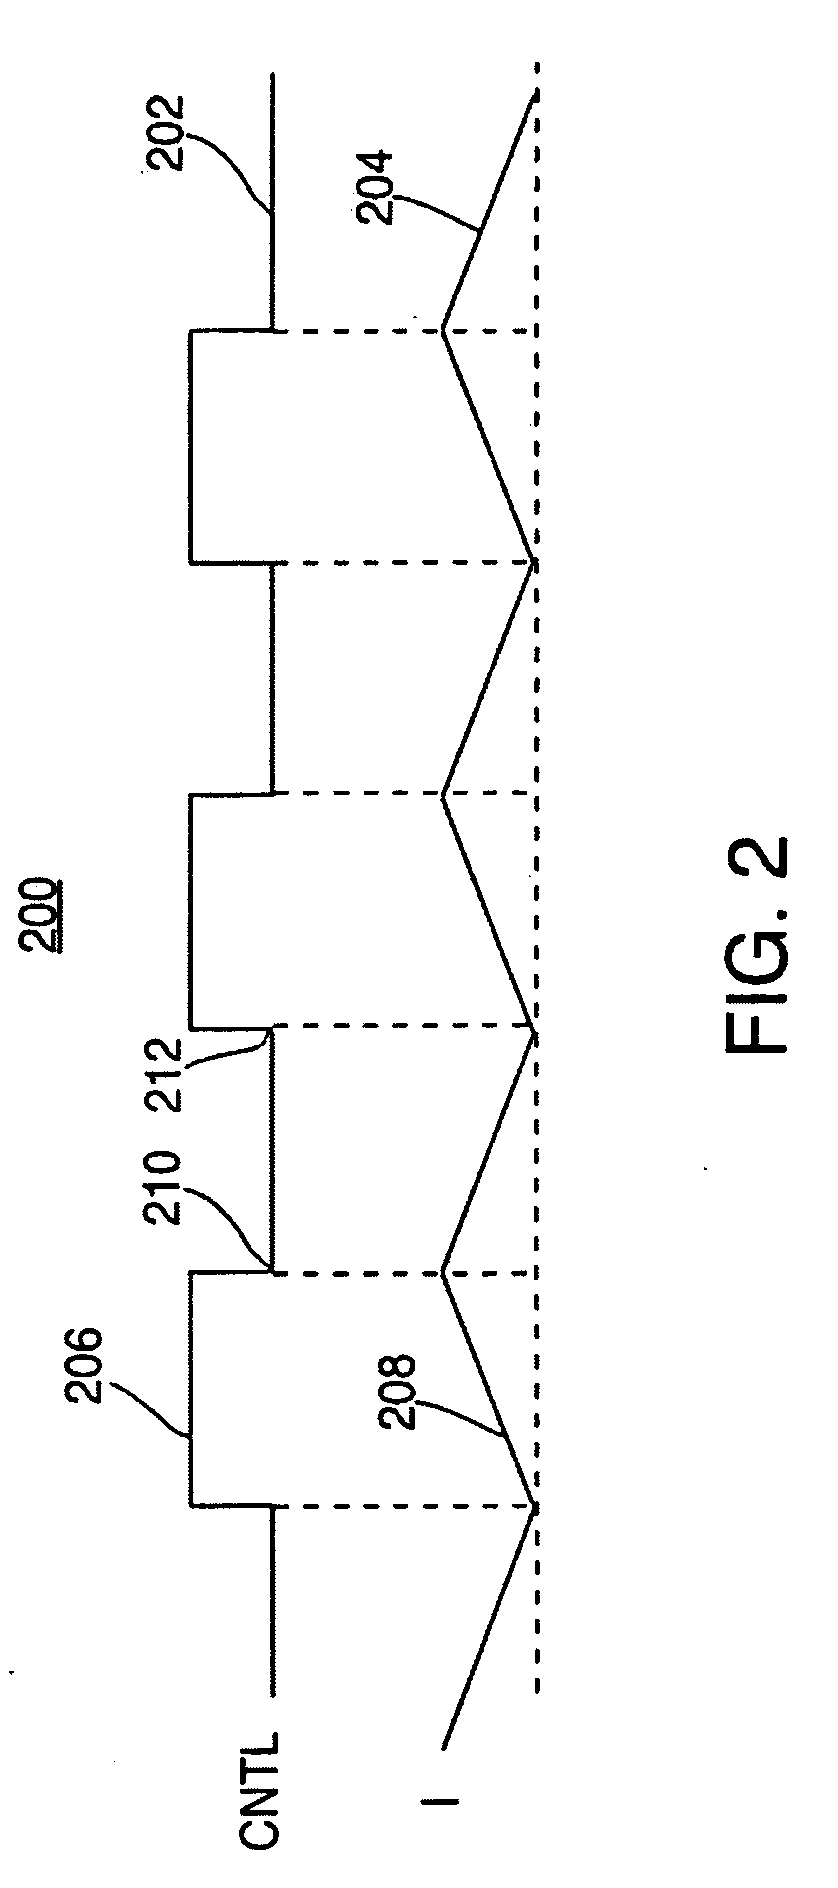 Method and apparatus for providing high speed, low EMI switching circuits